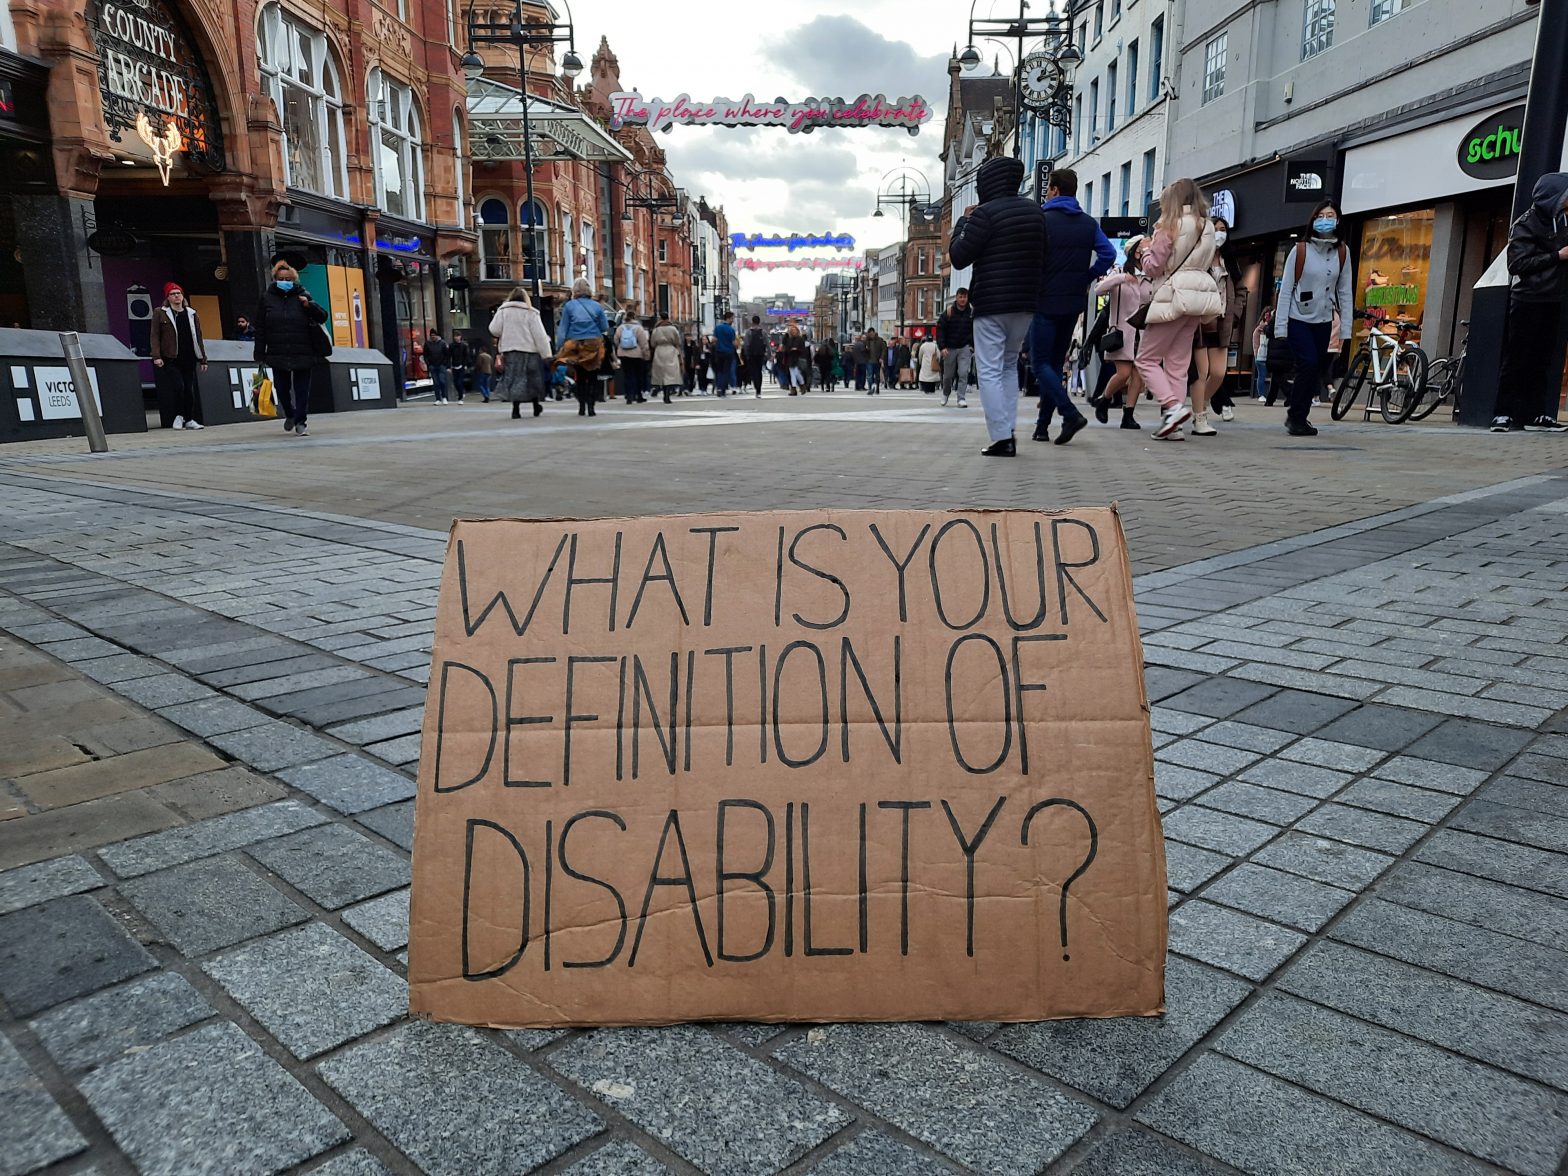 Image of a cardboard sign with the words on it ‘what is your definition of disability?’. The sign is on a pavement with shoppers walking in the background.